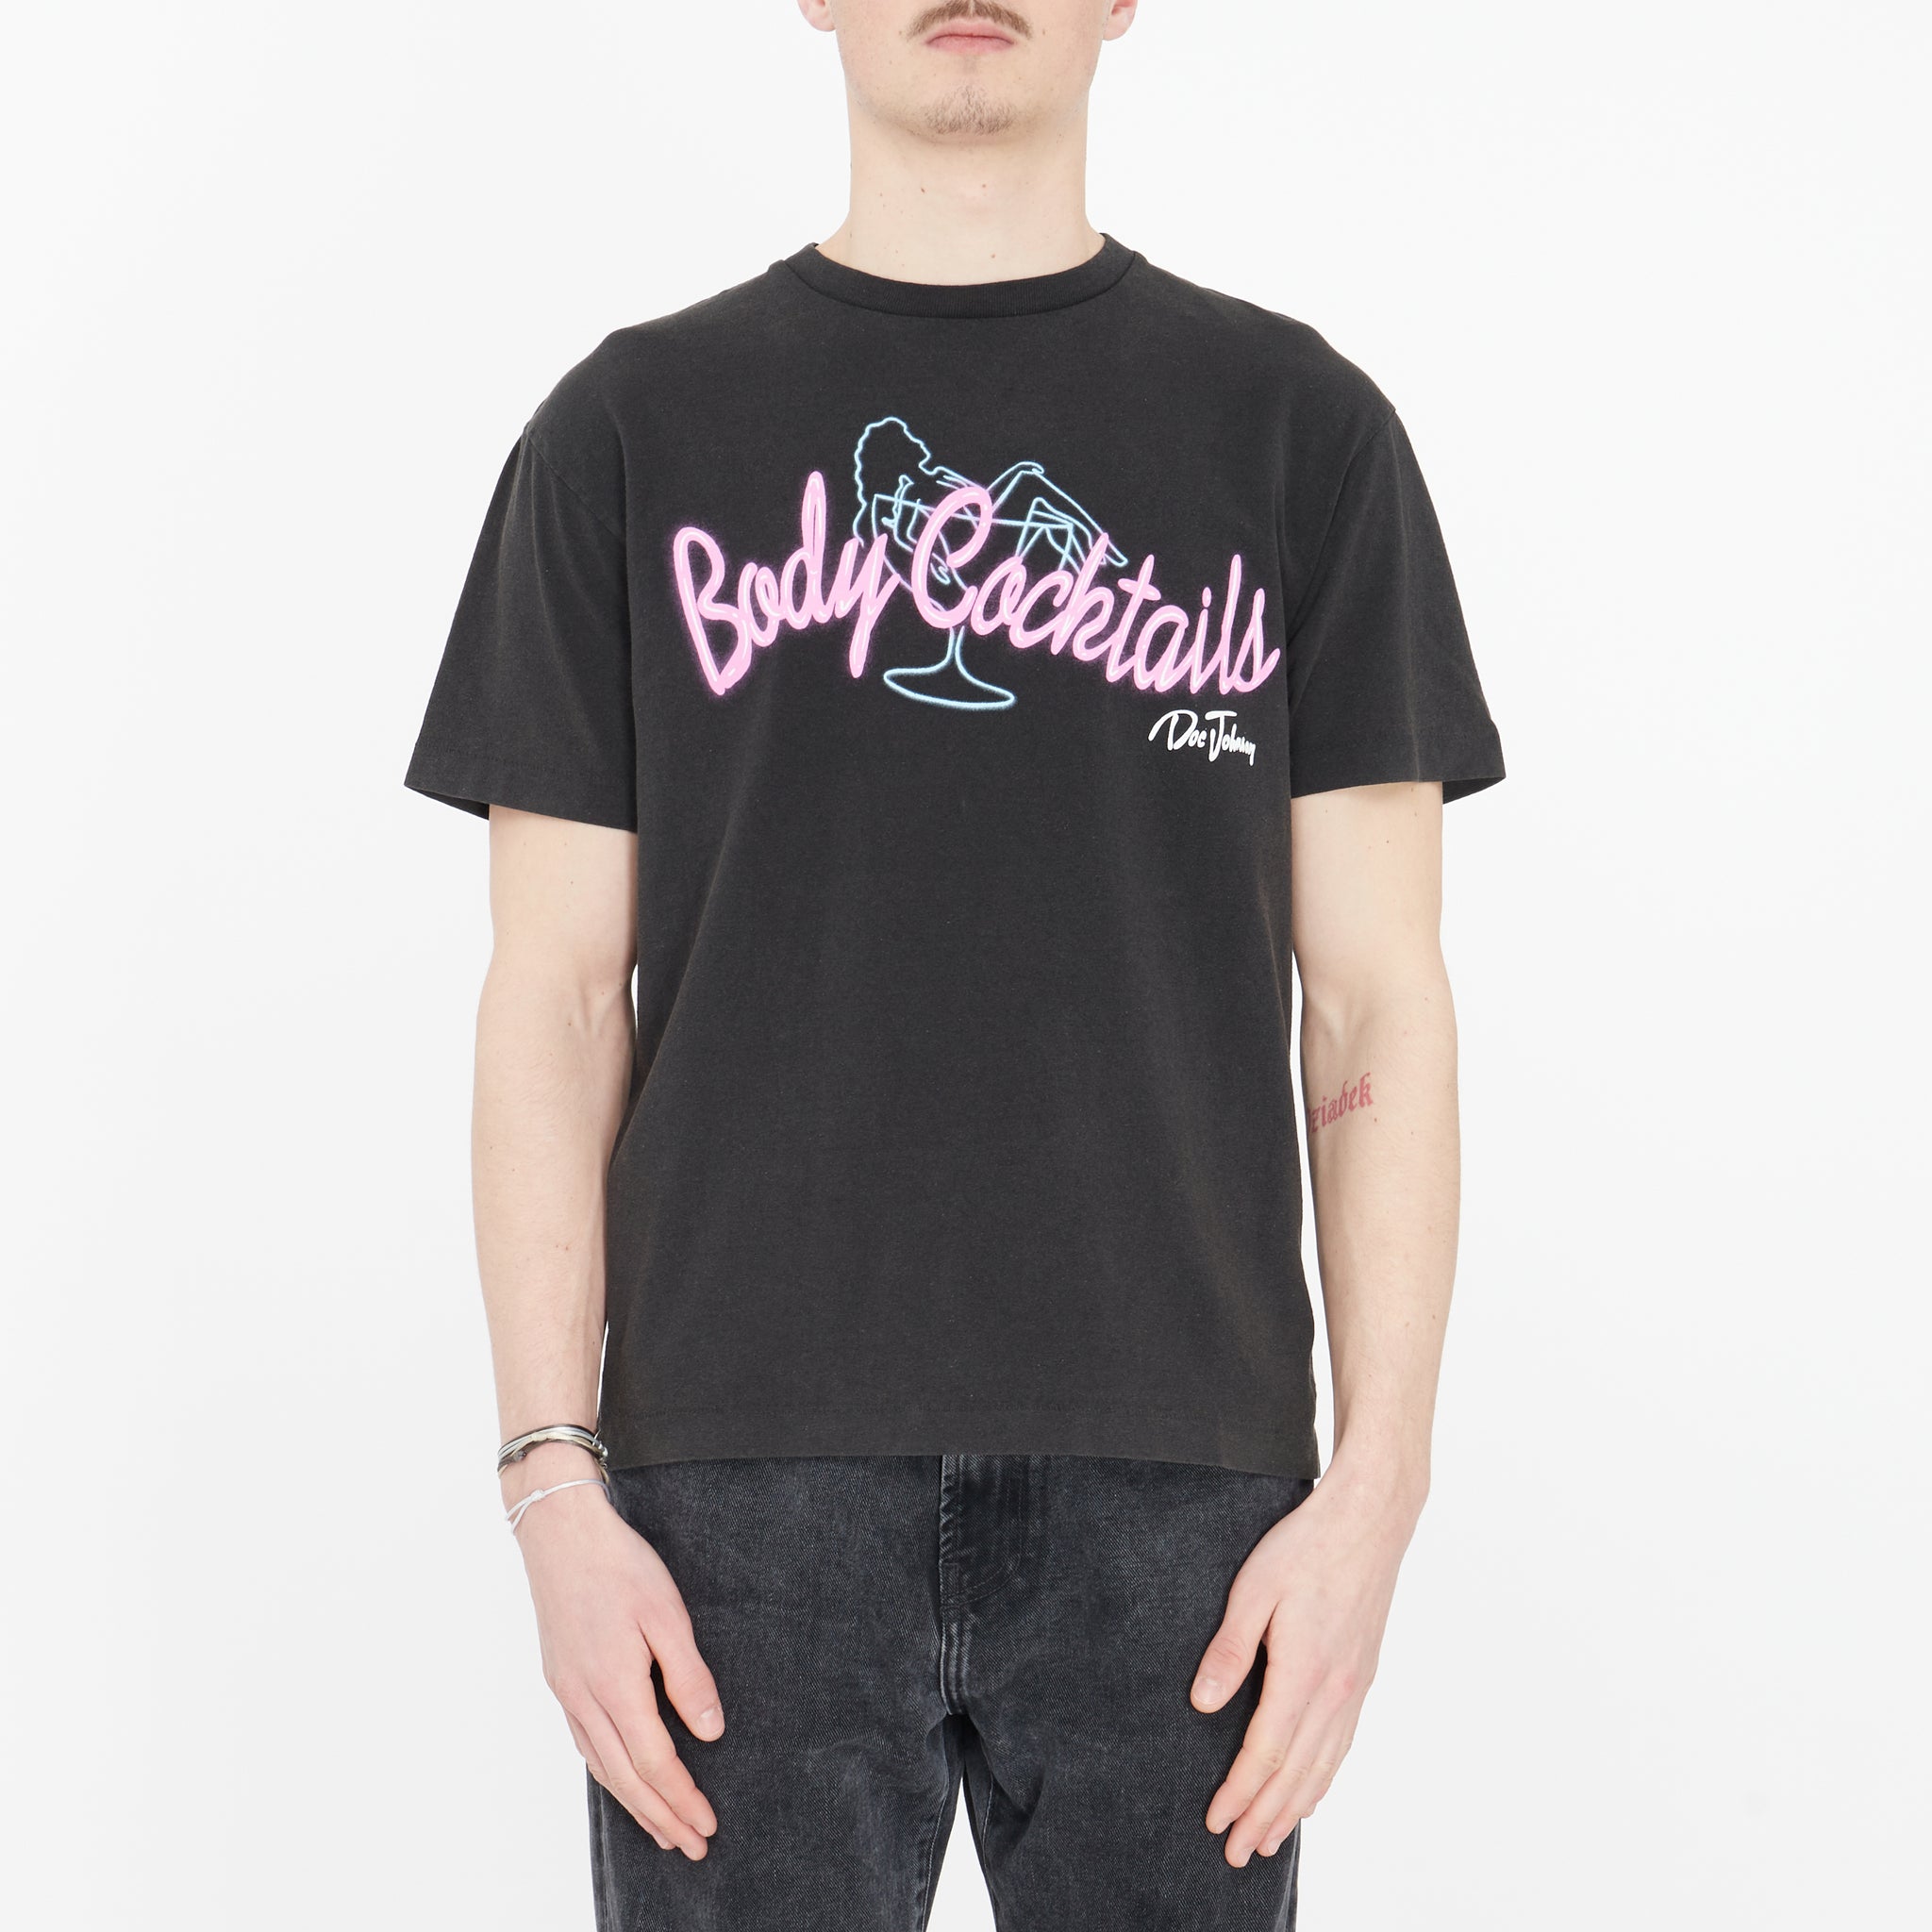 T-shirt Gallery Dept Body Cocktails